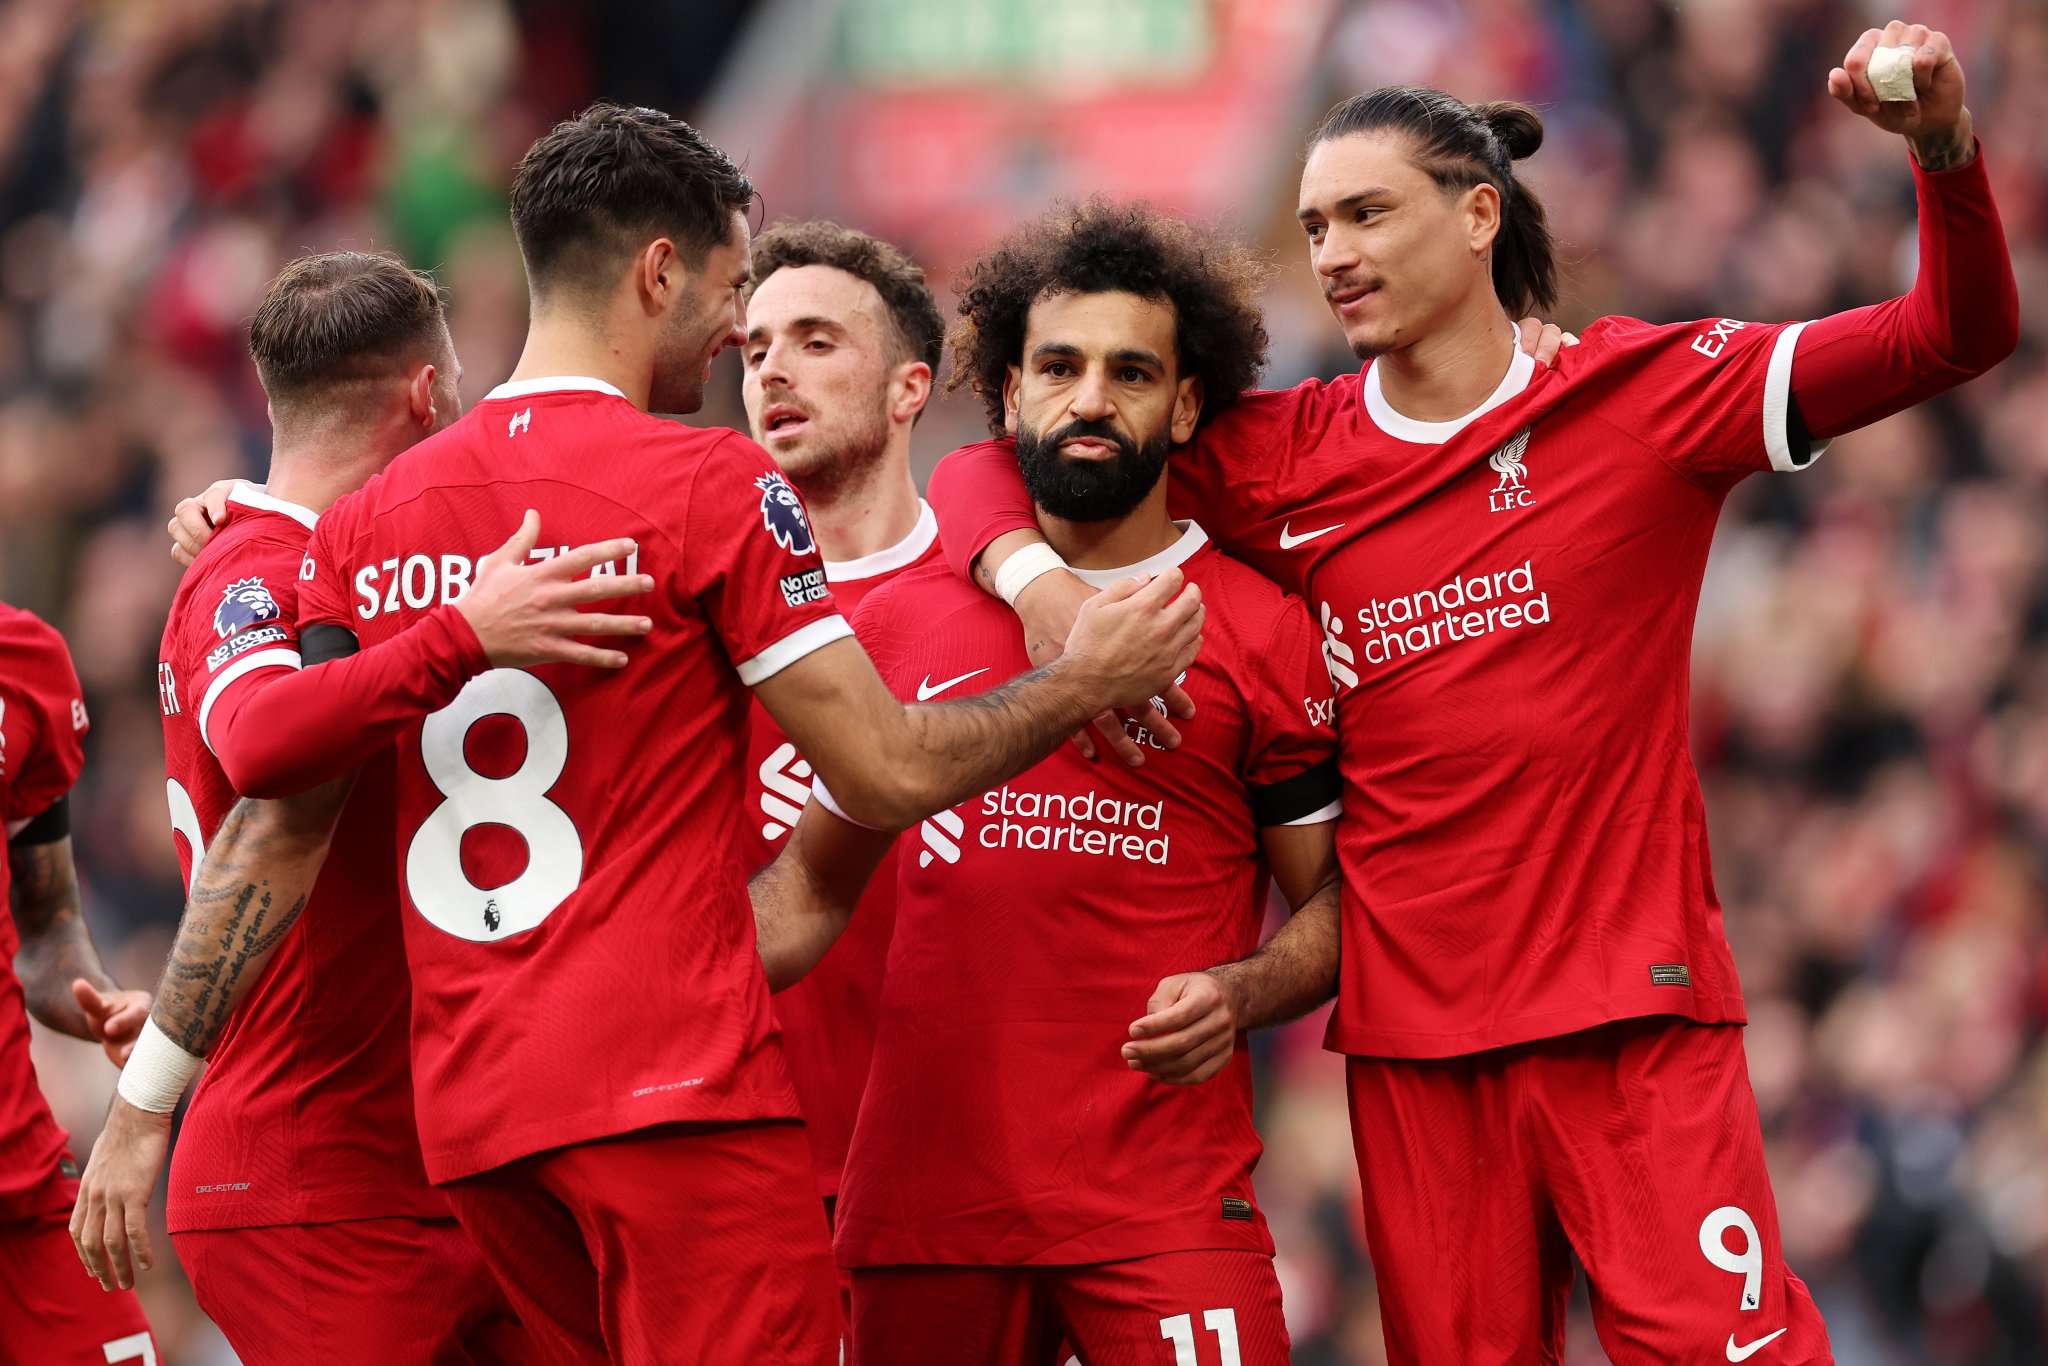 Mohamed Salah double gives Liverpool derby win over 10-man Everton